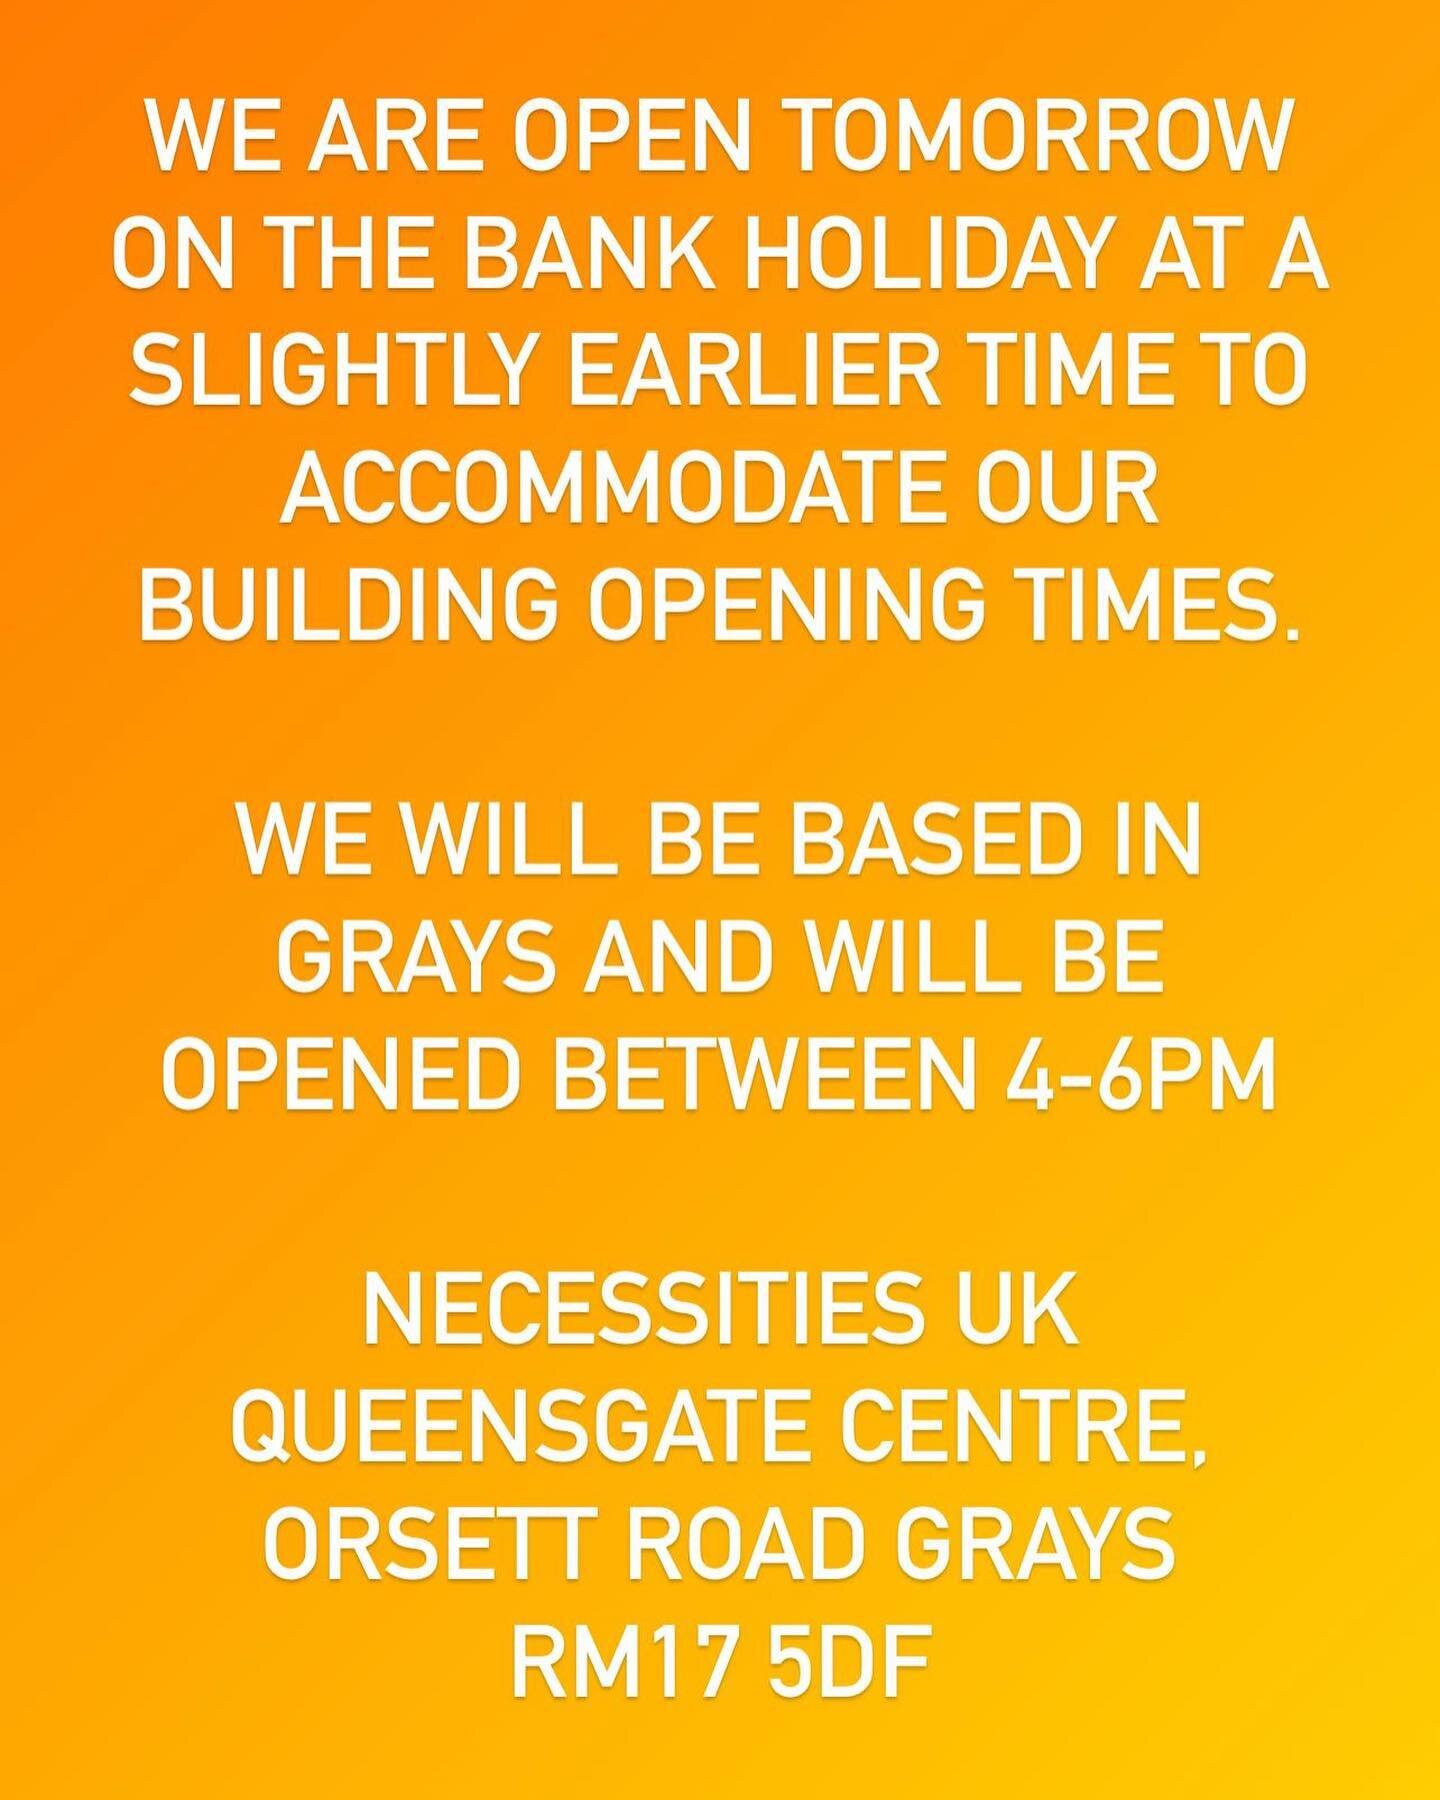 Correction to previous post!! We are open on Monday 19th September 2022 at a slightly earlier time at 4-6pm in our Grays location.